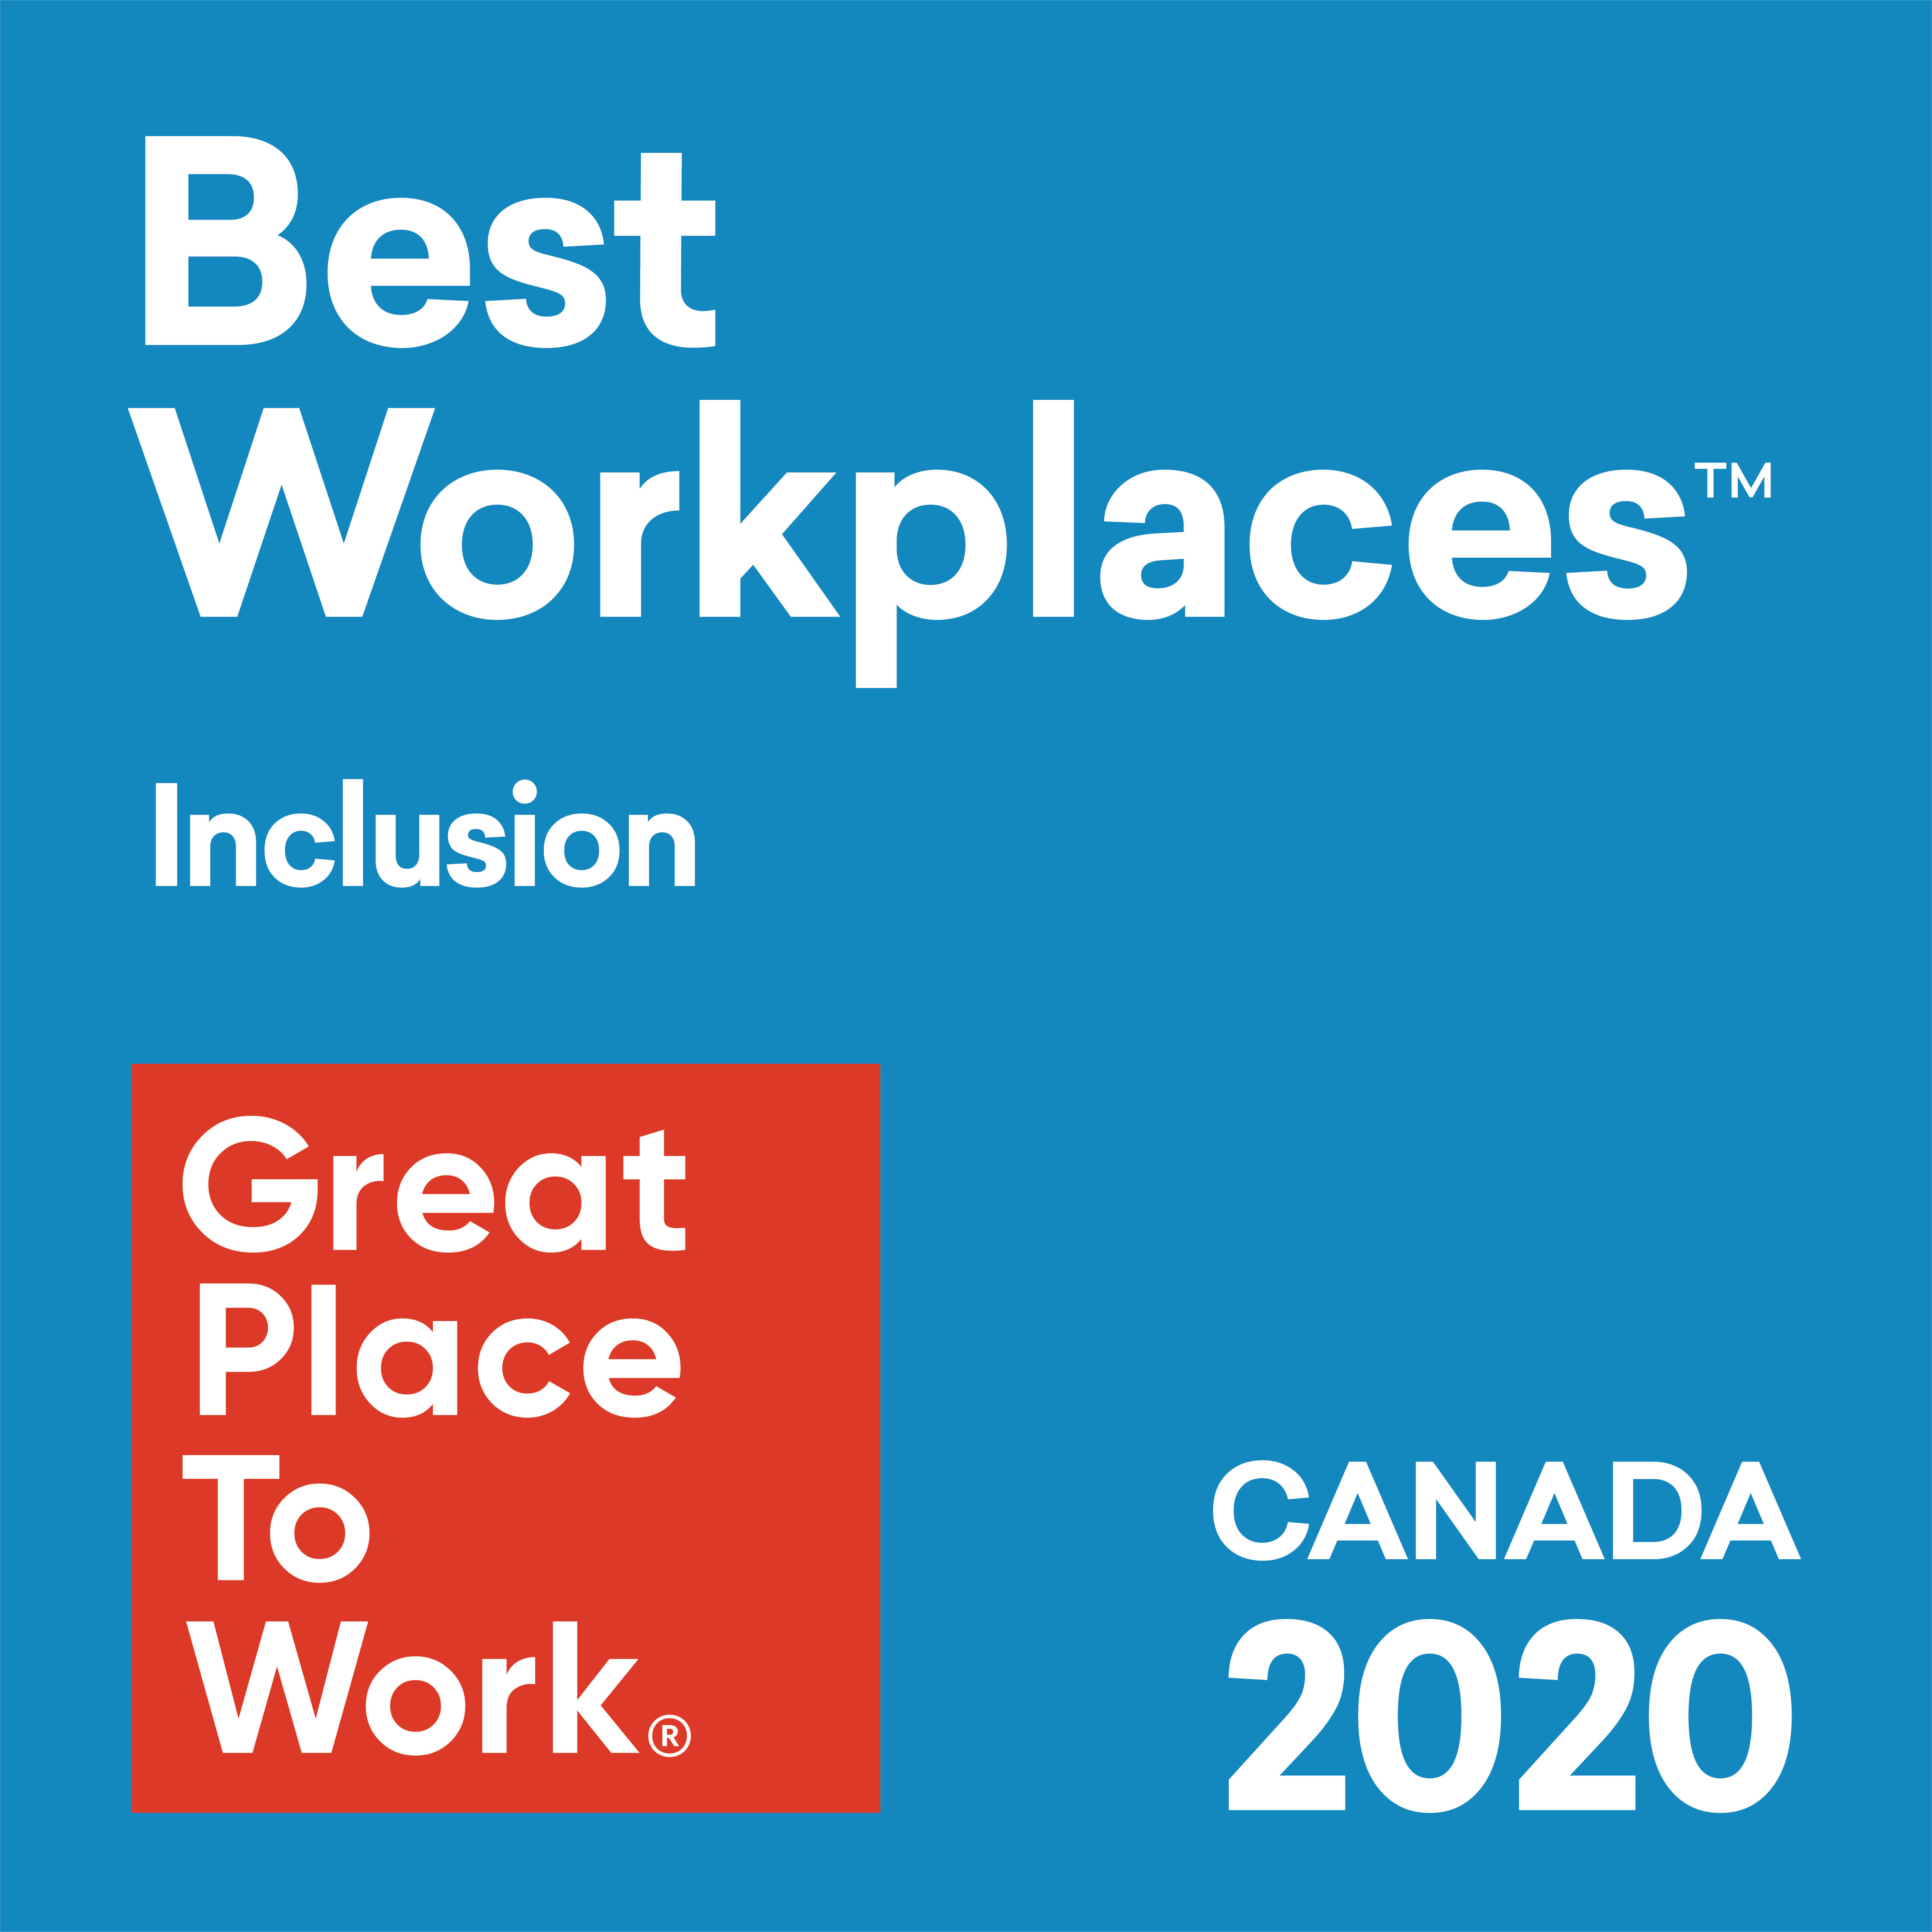 Best Workplaces Inclusion award 2020